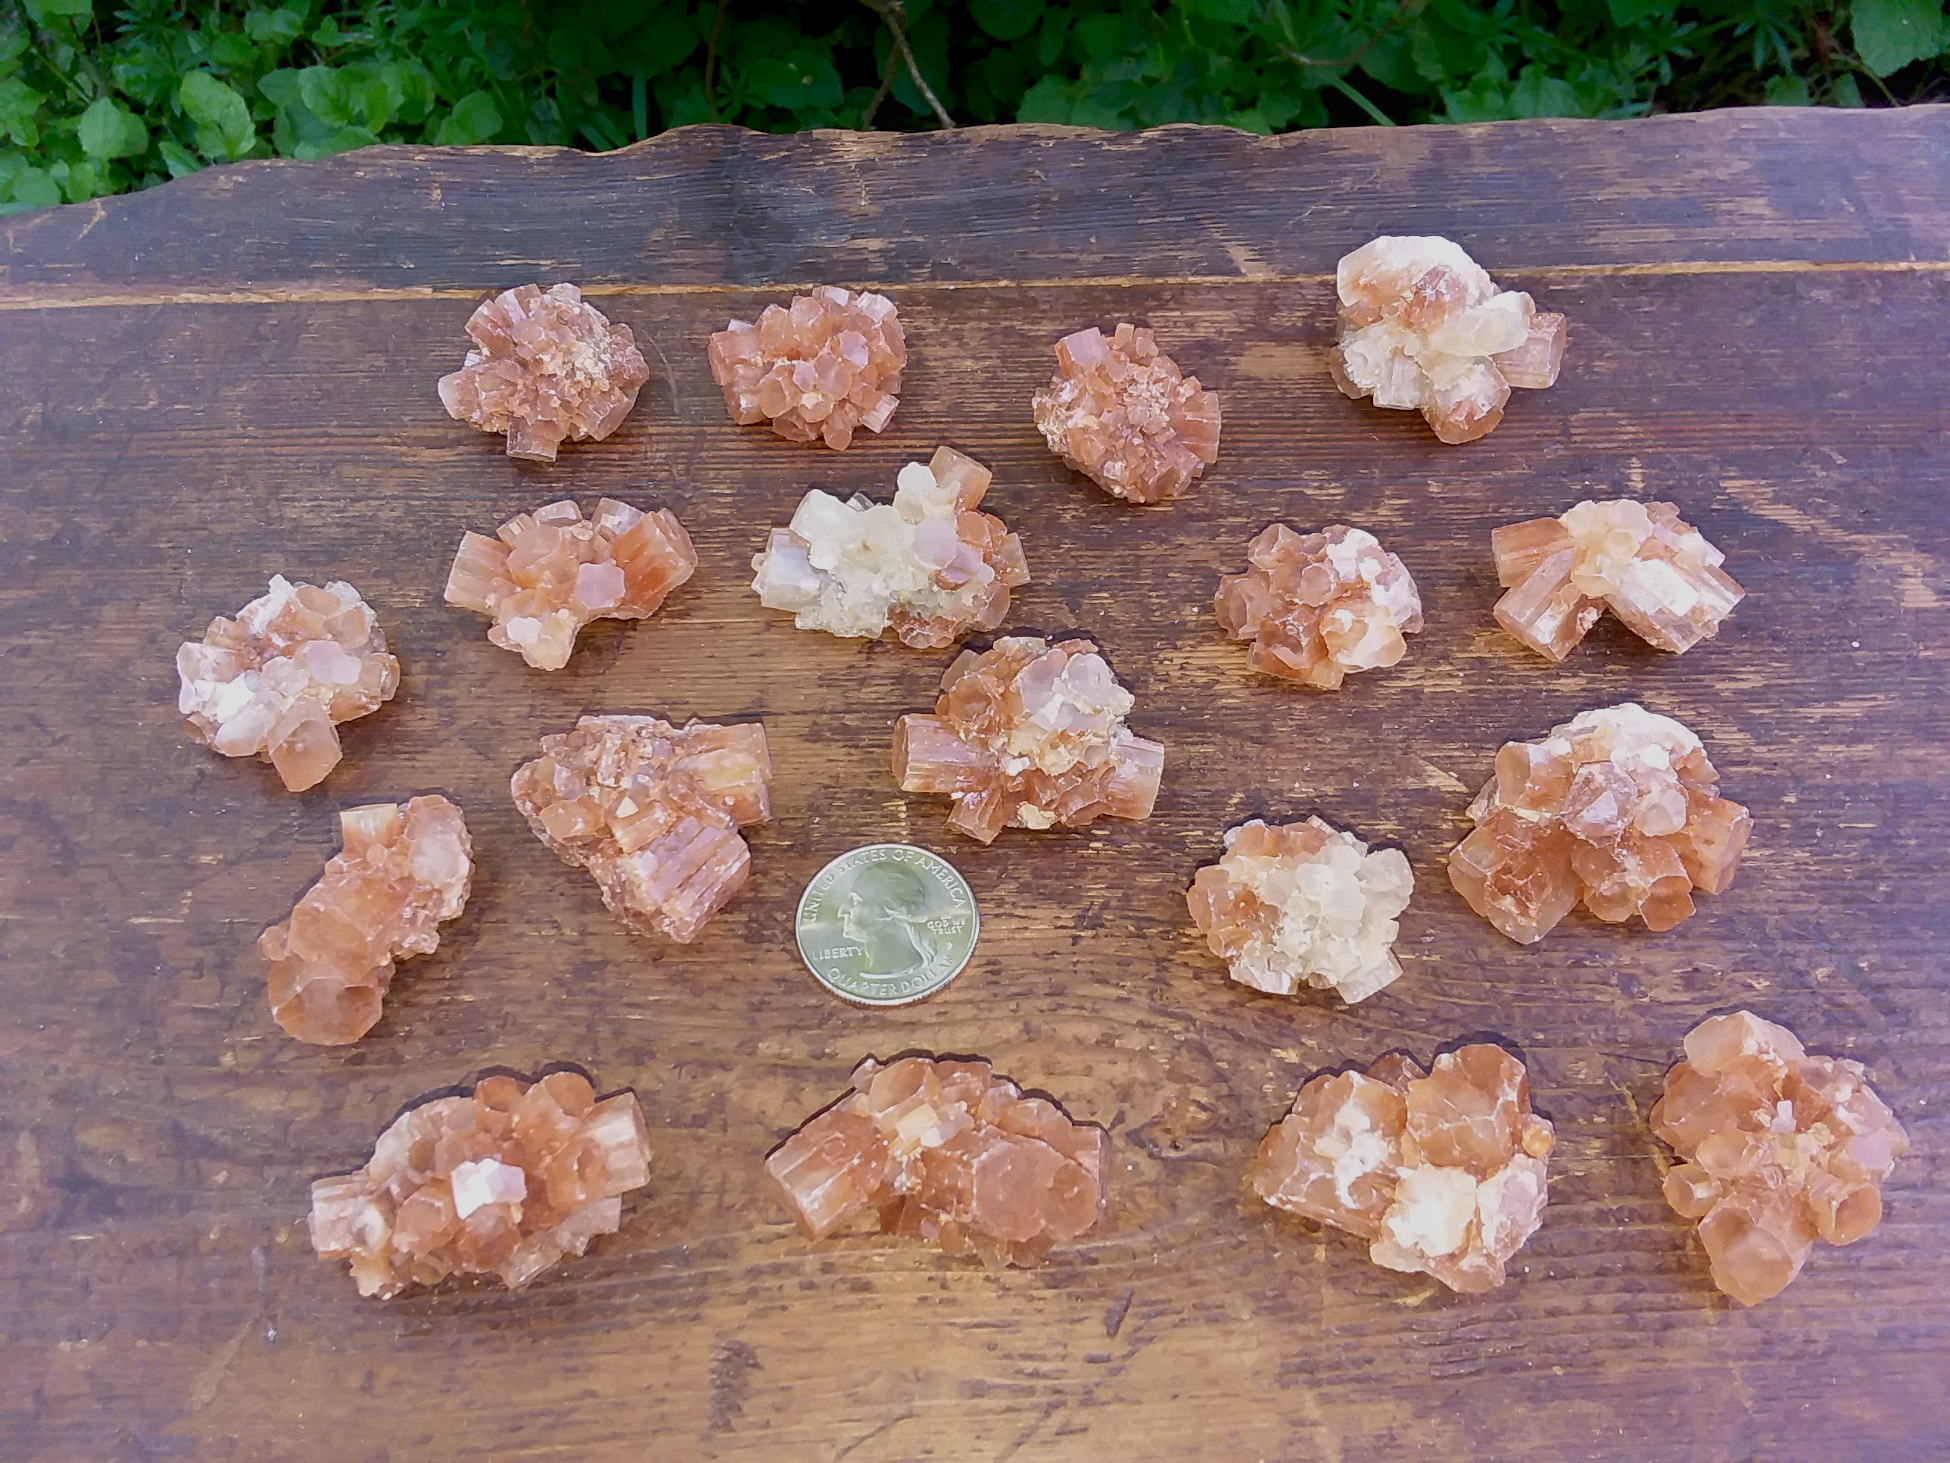 Argonite Star Cluster small 1" to 1.5"